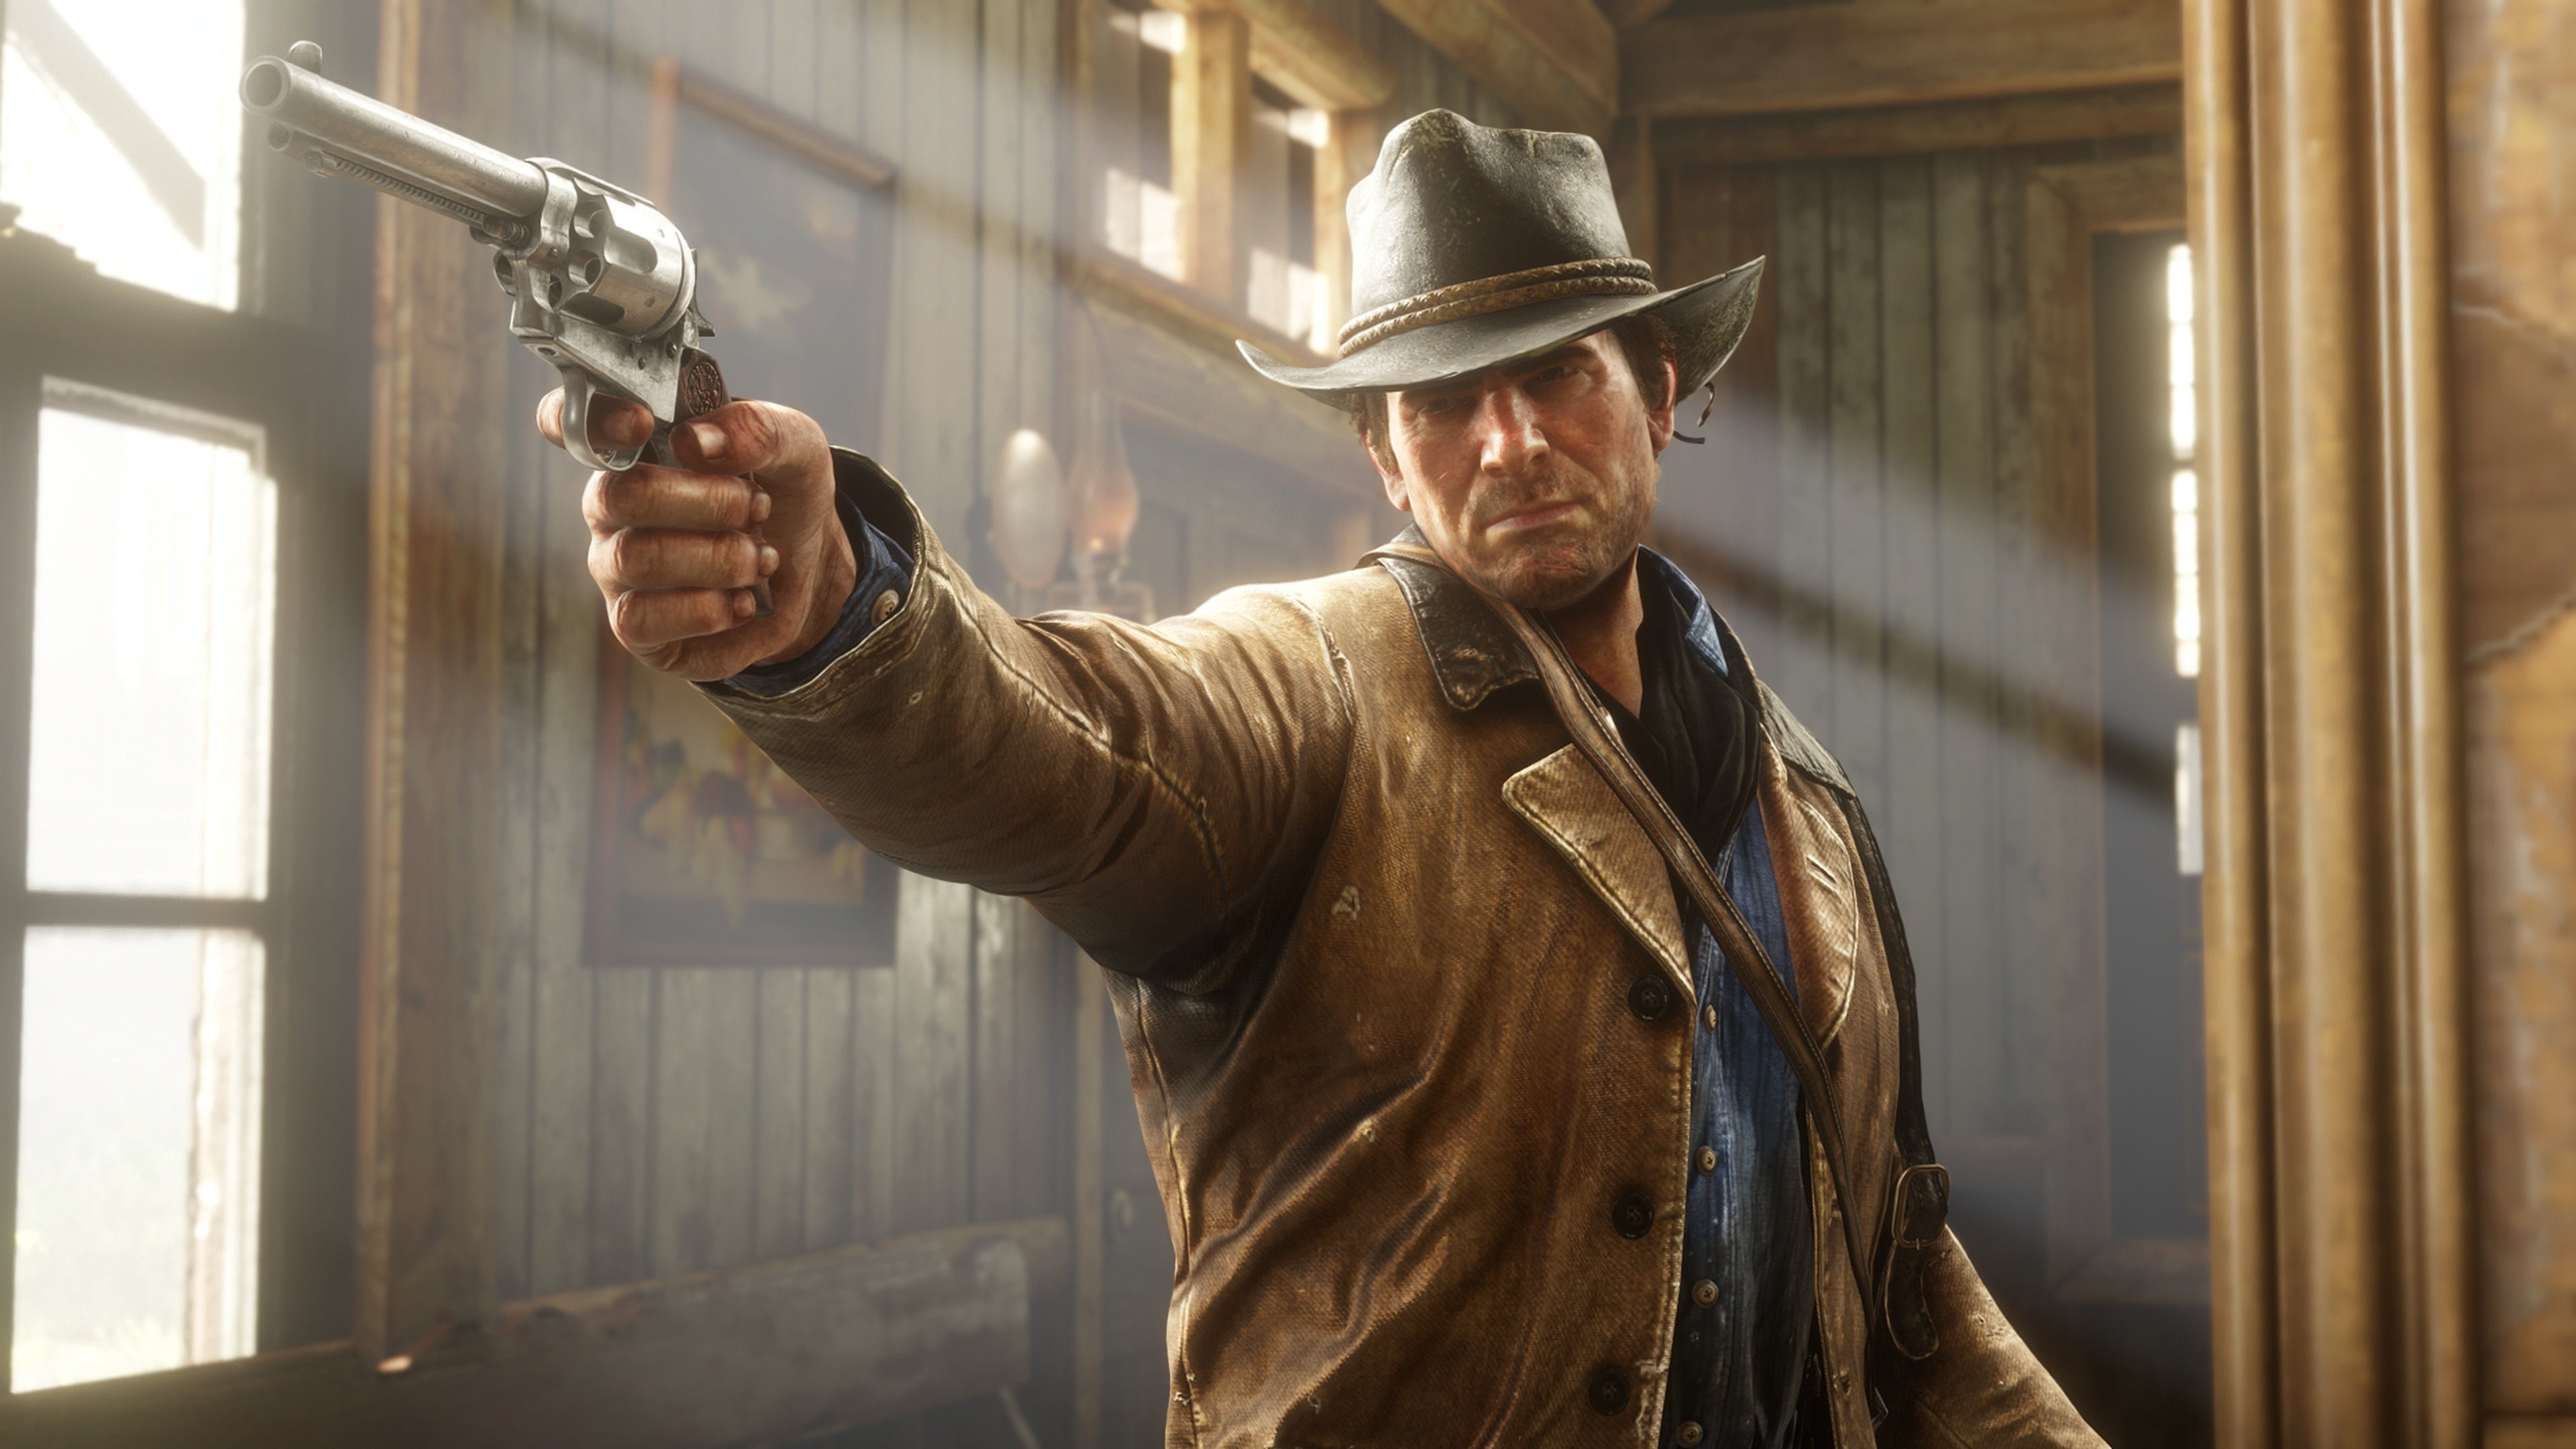 Image for Red Dead Redemption 2 has now shipped more than 24 million, GTA 5 over 110 million